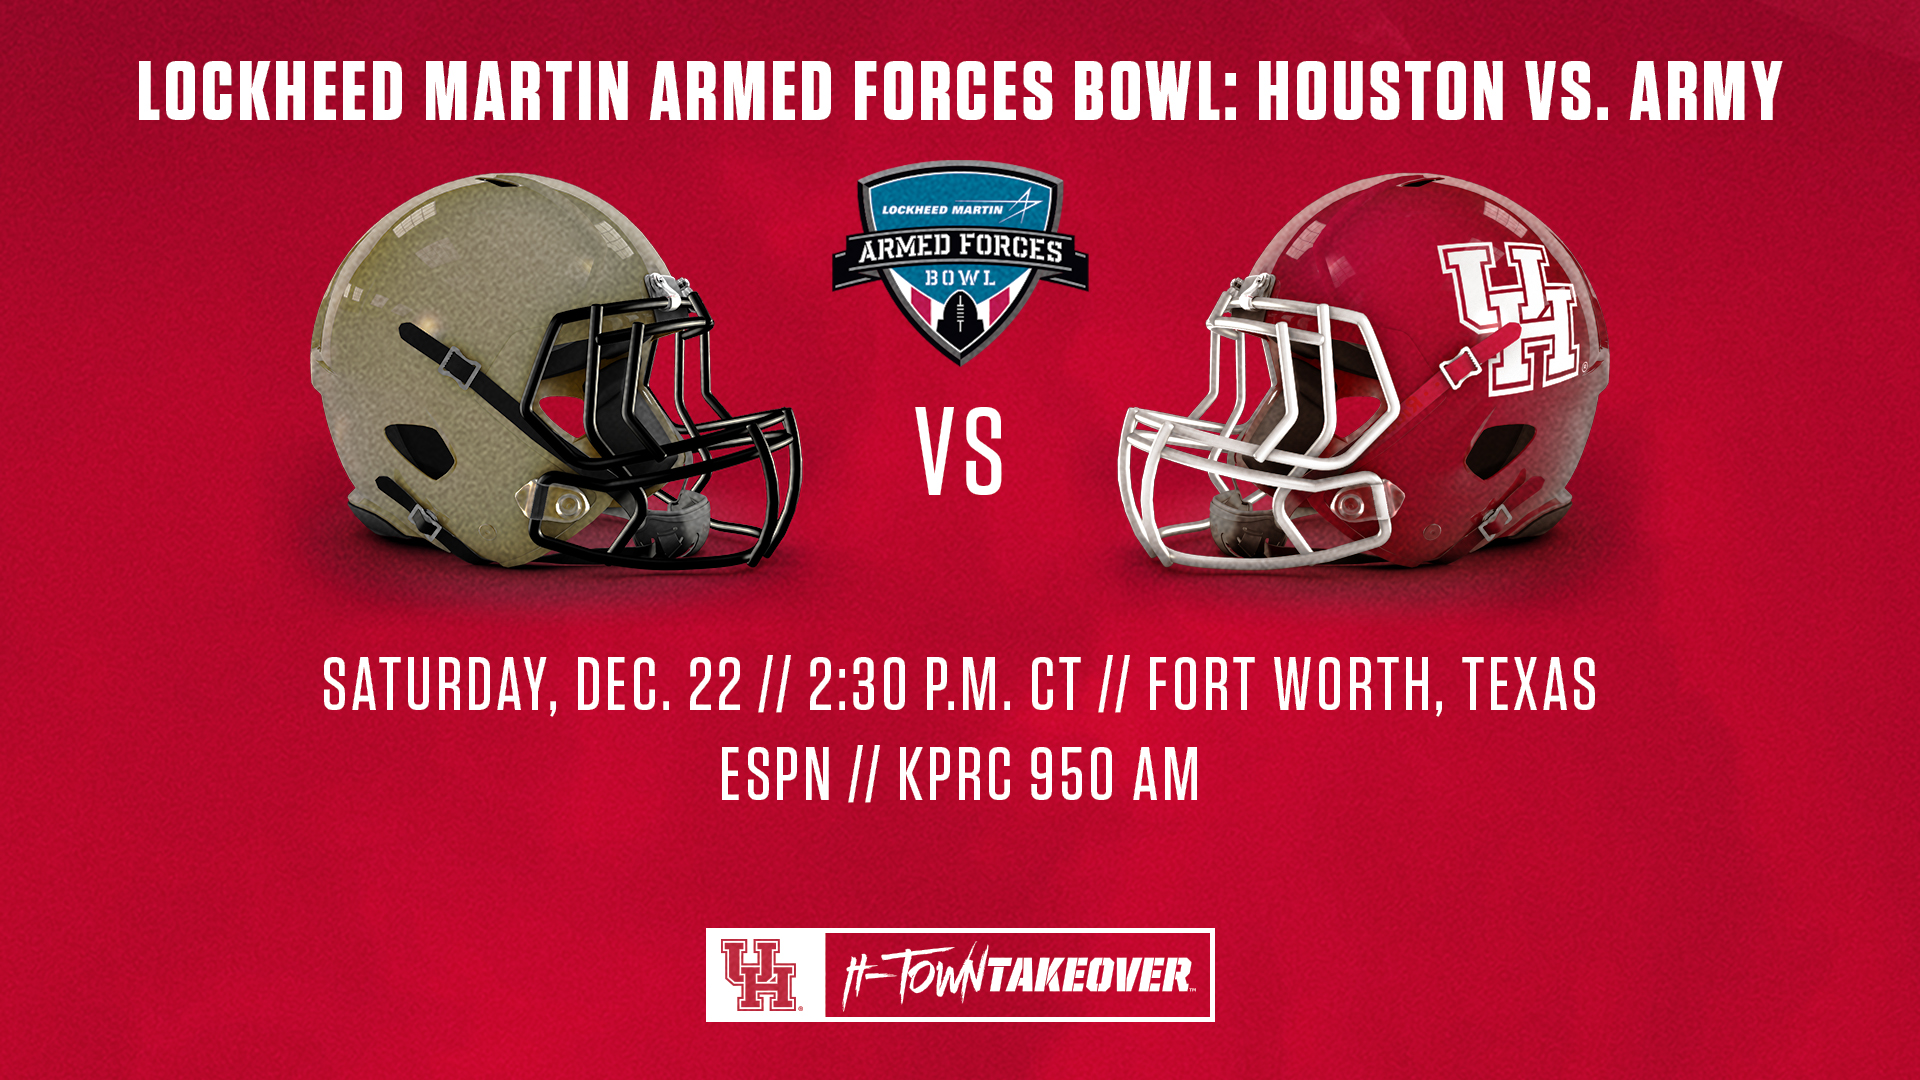 Army completely destroys Houston in 70-14 annihilation